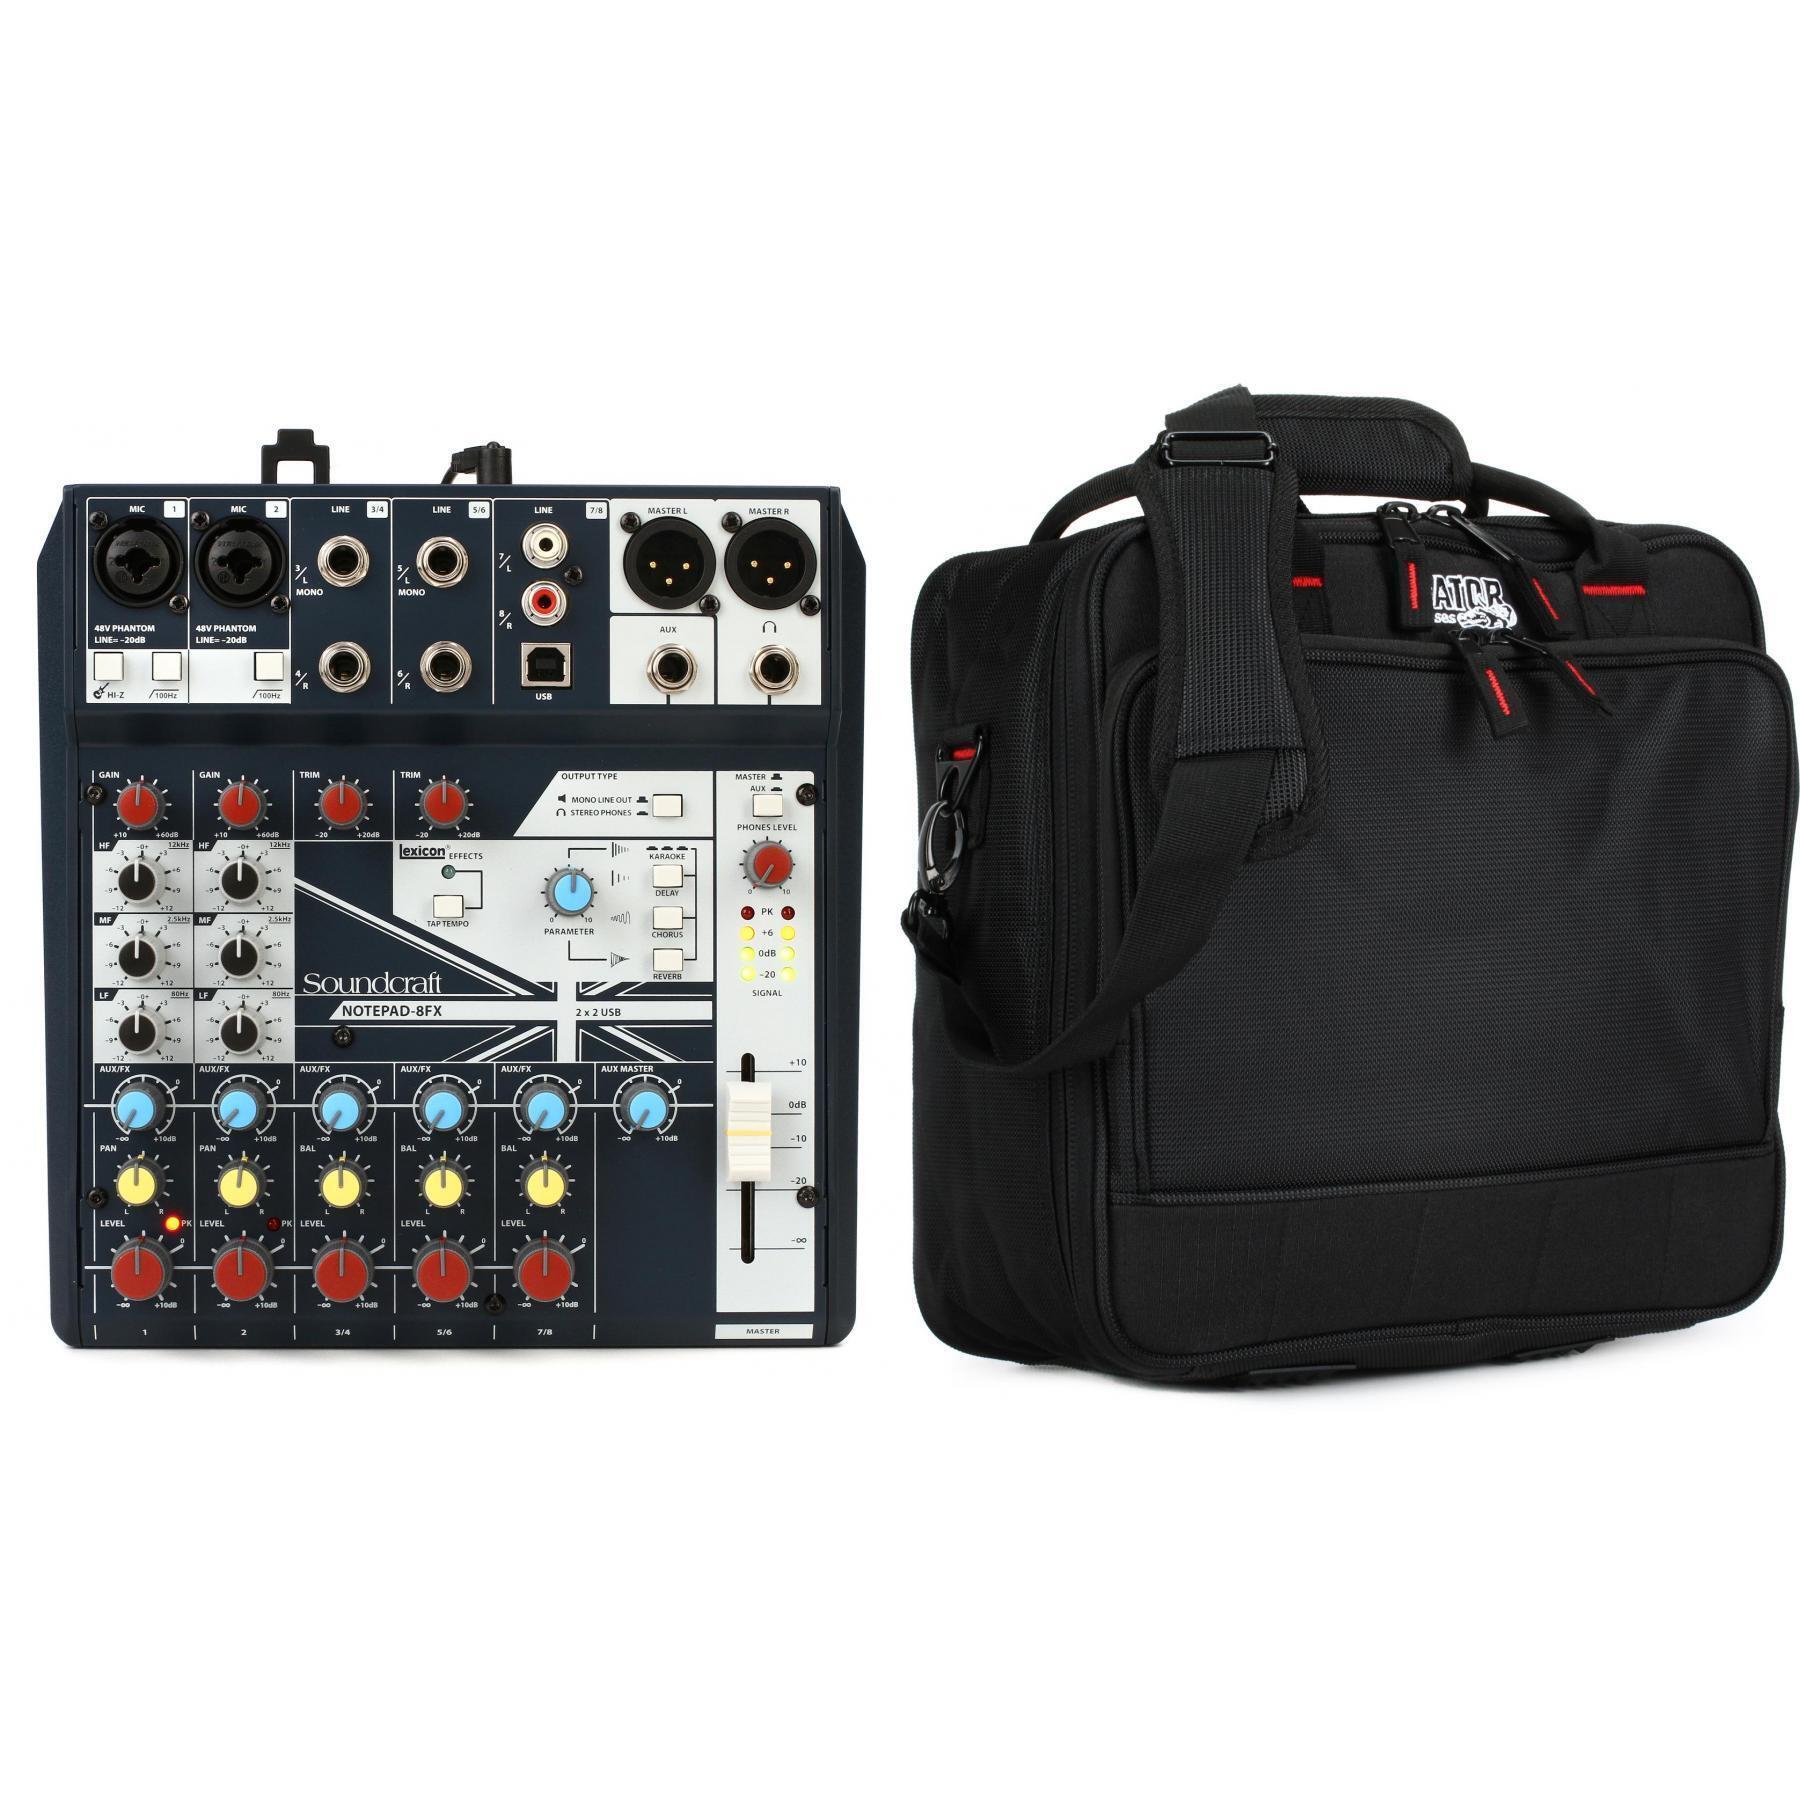 Soundcraft Notepad-8FX Mixer and Bag Bundle | Sweetwater